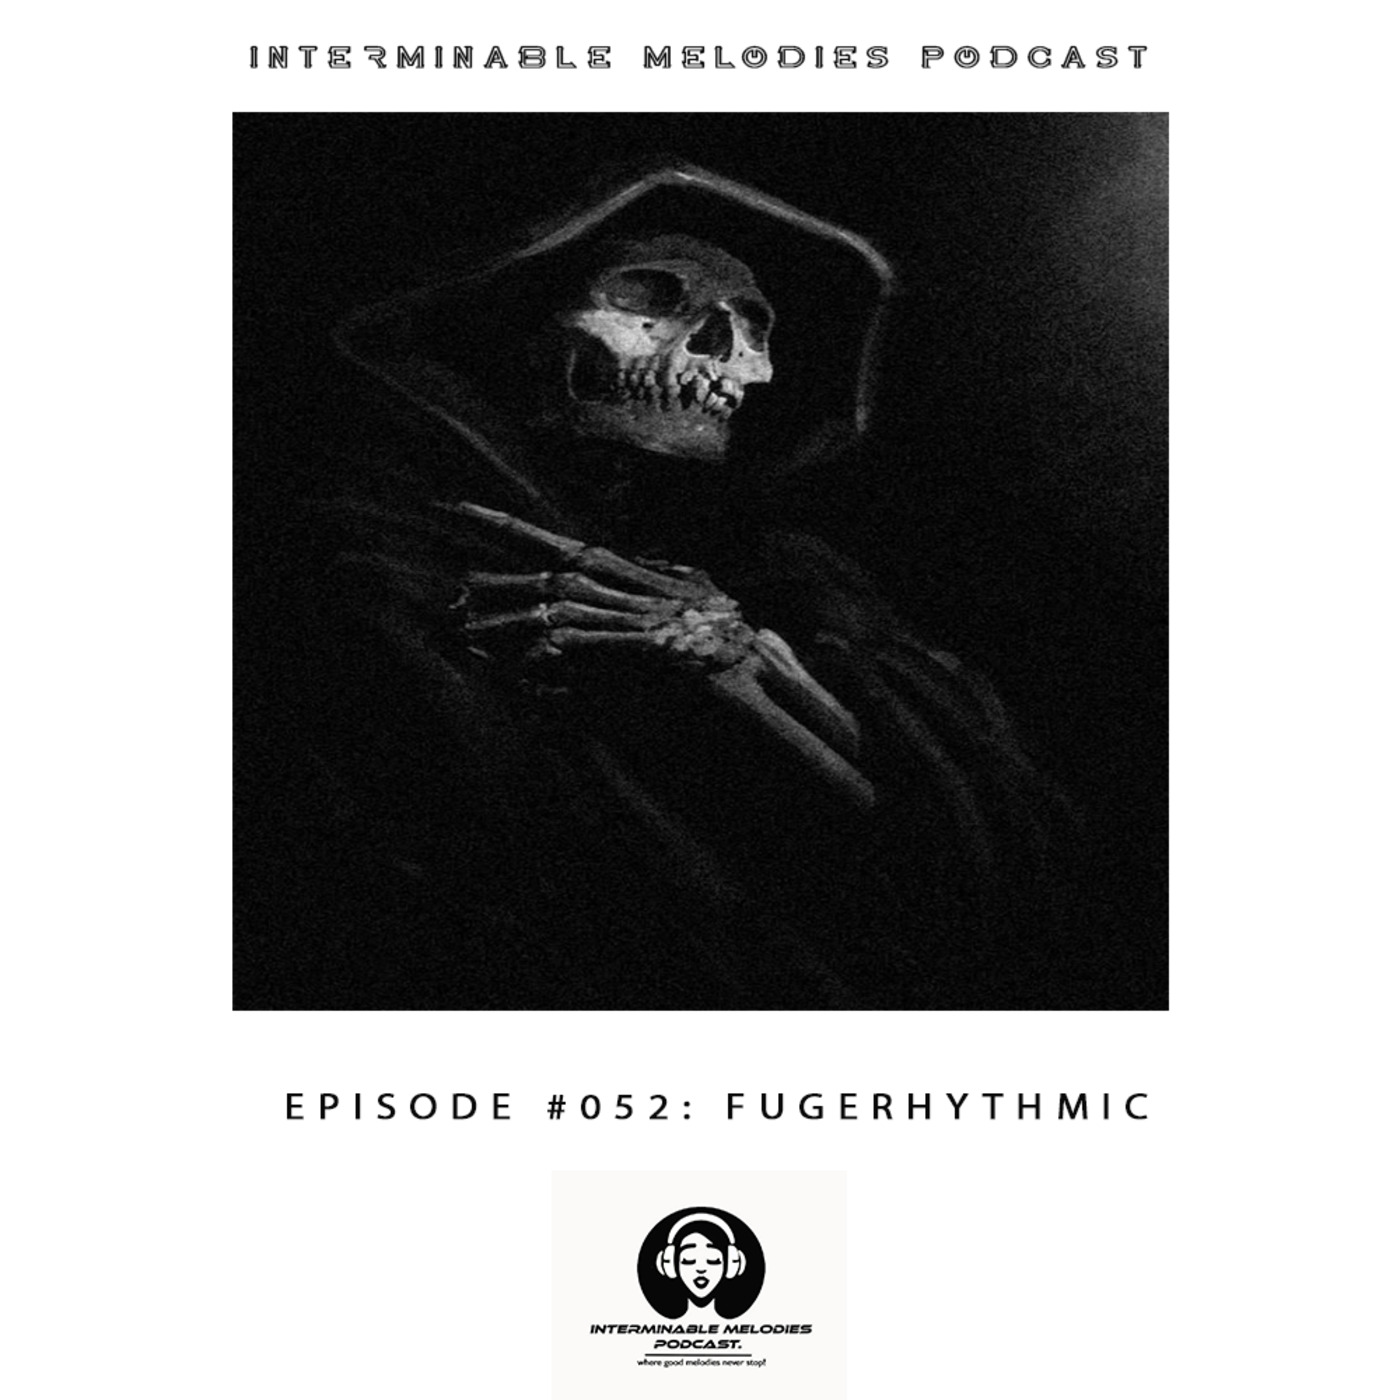 Interminable Melodies Podcast 052 Guest Mix By Fugerhythmic